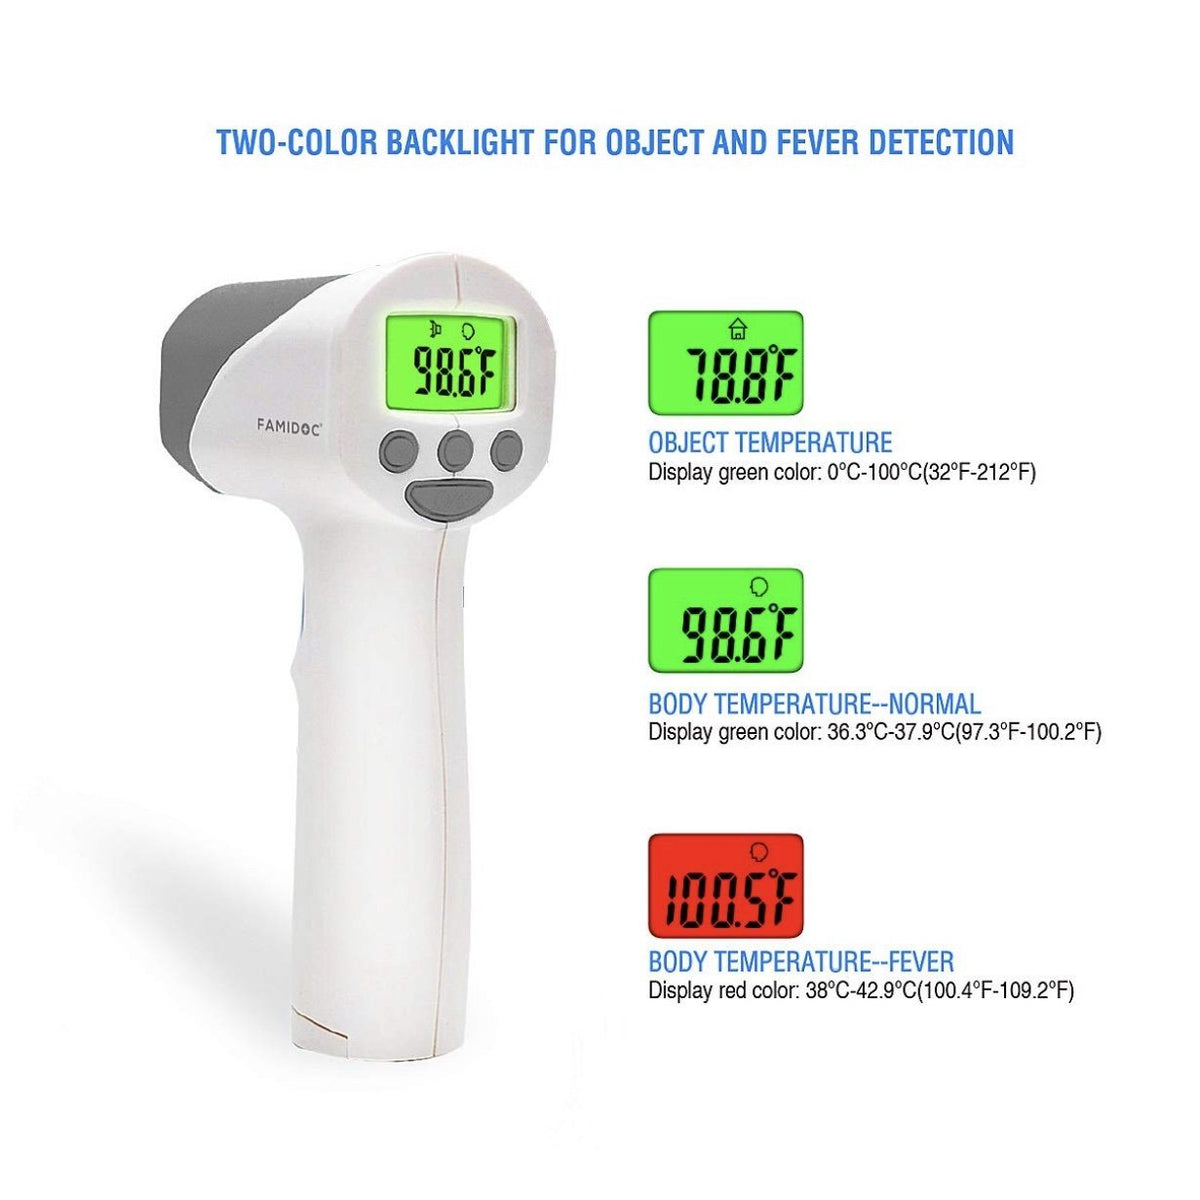 Non-Contact Infrared Thermometer (Fahrenheit) - The First Aid Gear Shop